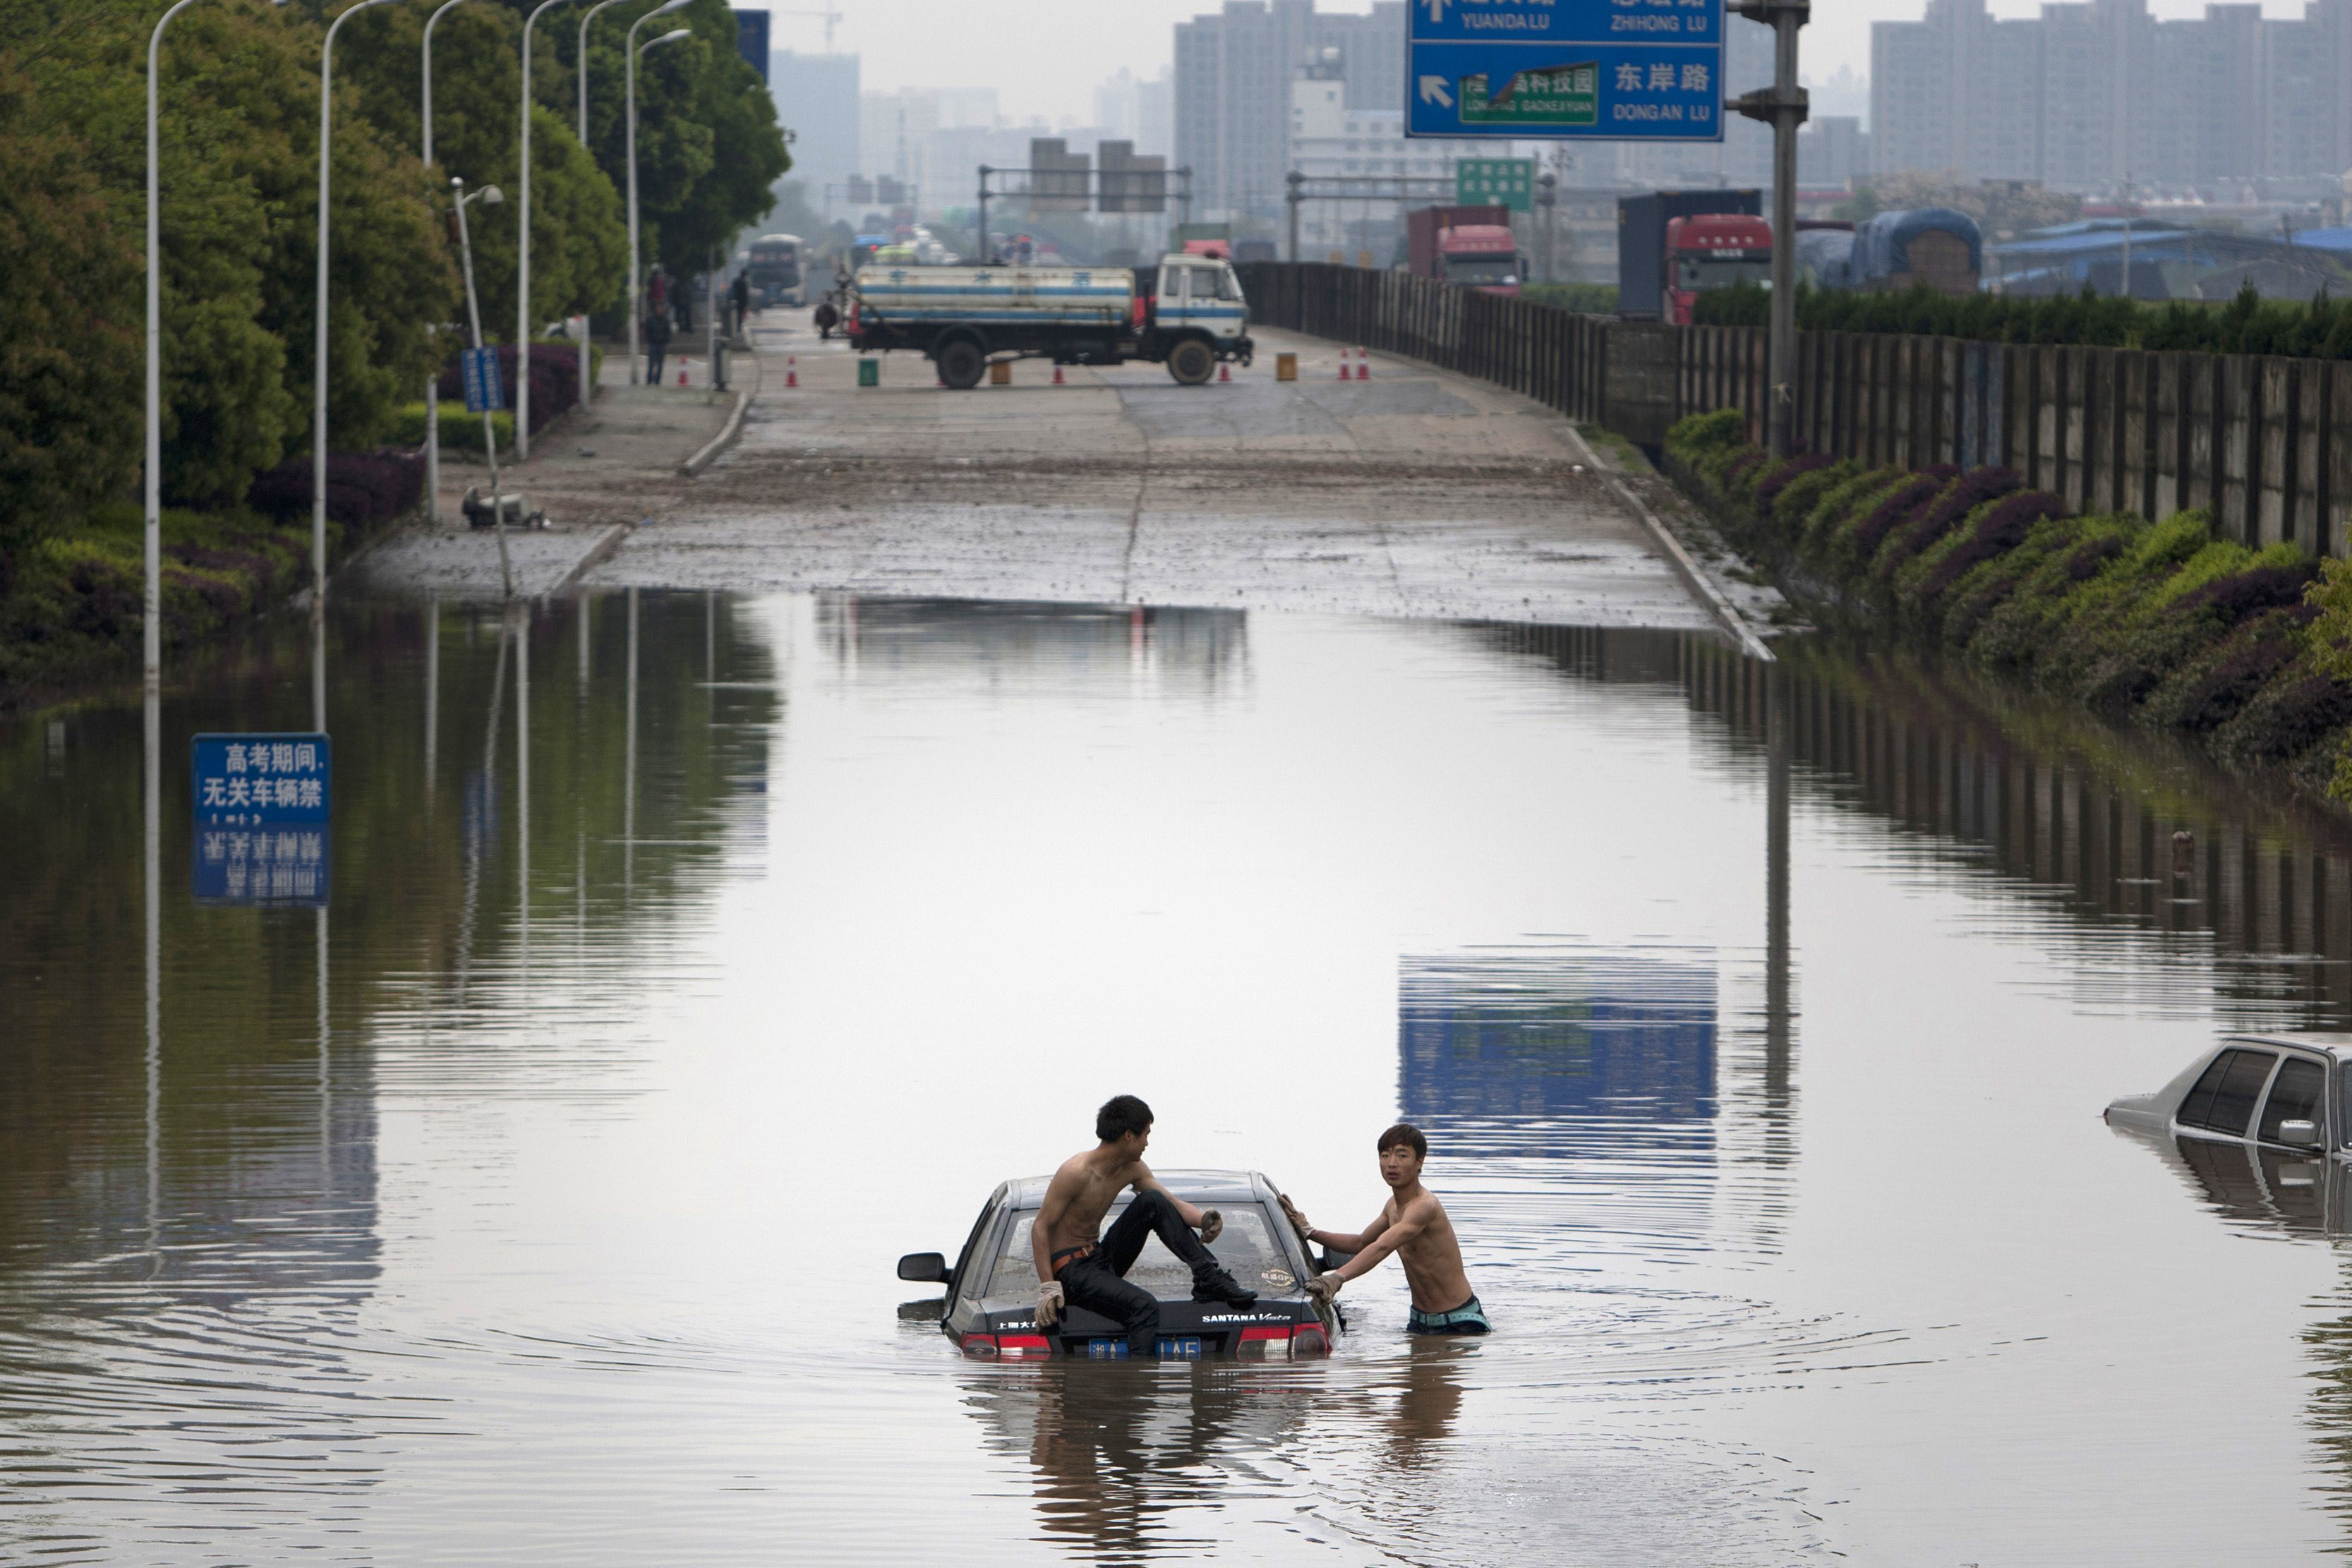 This picture shows two men attempting to push a car out of floodwaters after a storm swept Changsha, central China's Hunan province on taken on April 7, 2015 (AFP/Getty Images)